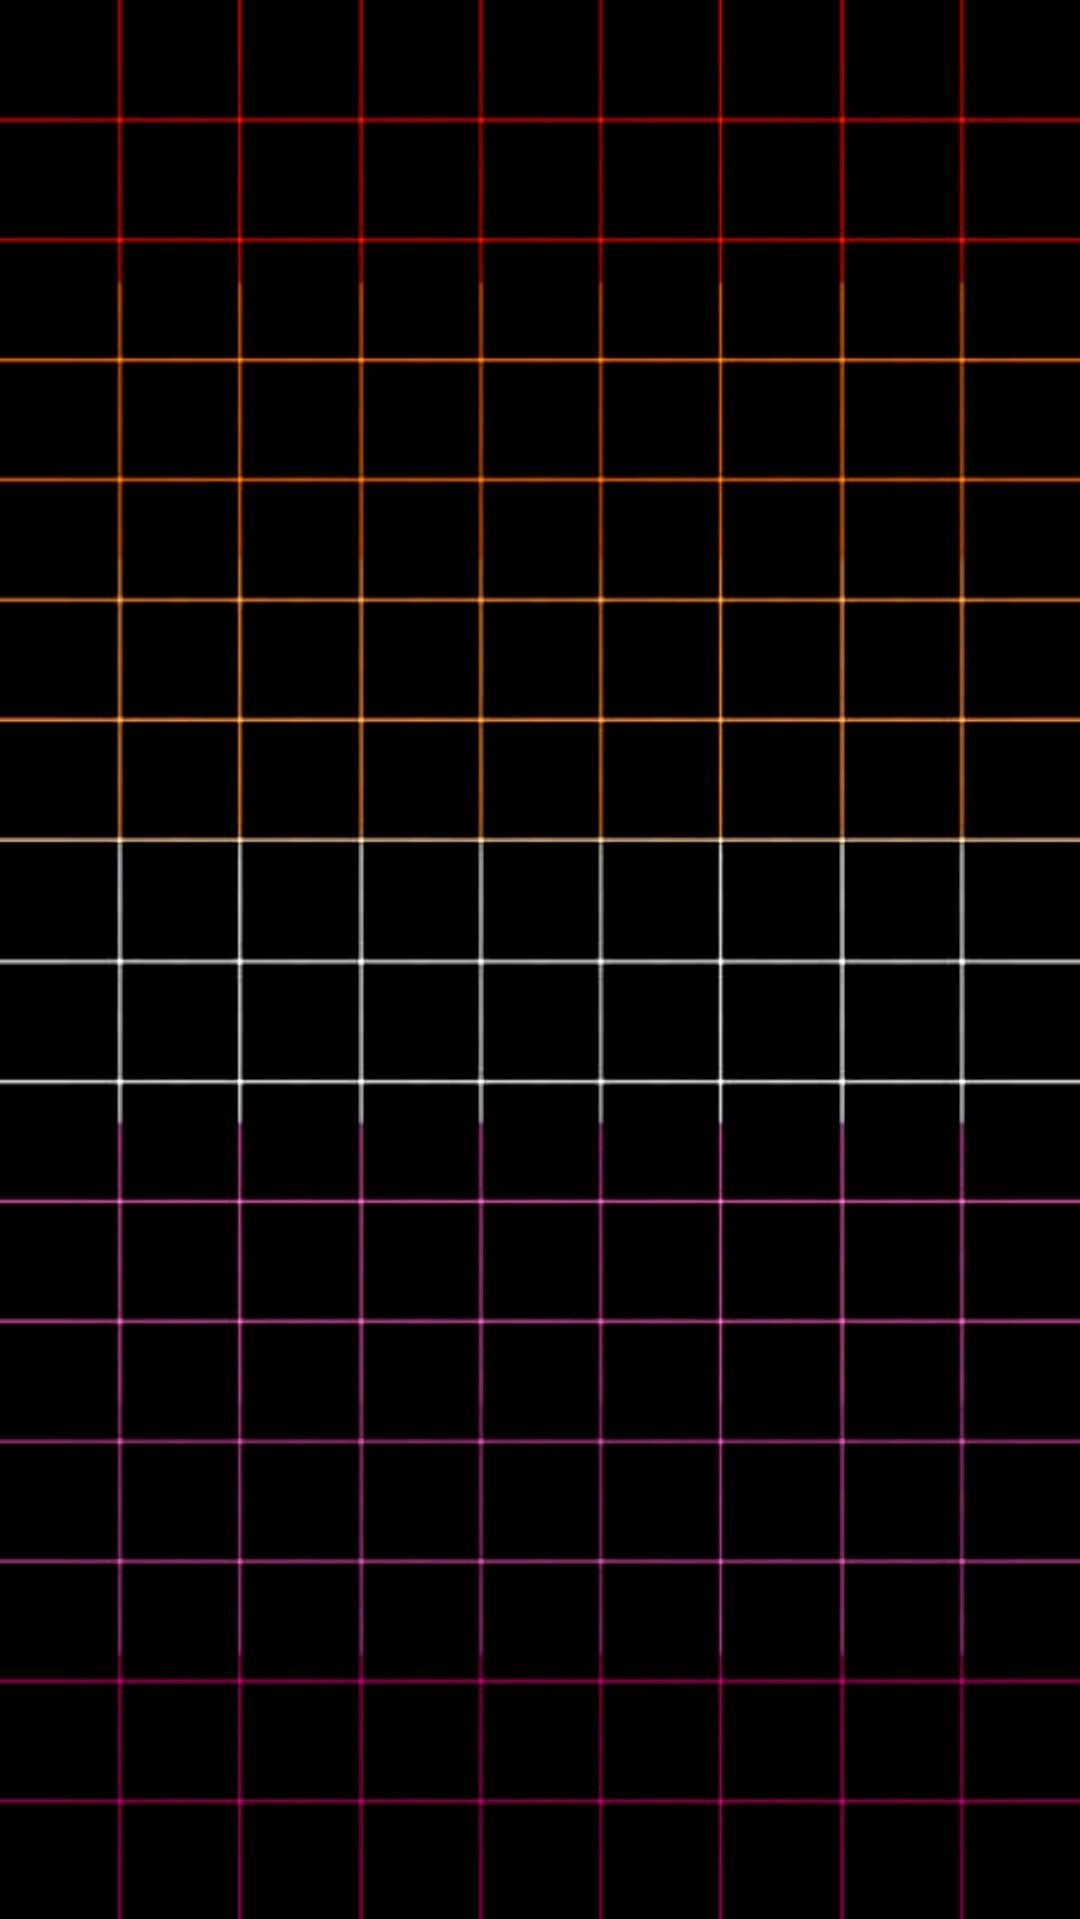 A black background with a grid of red, orange, pink, and purple lines - Lesbian